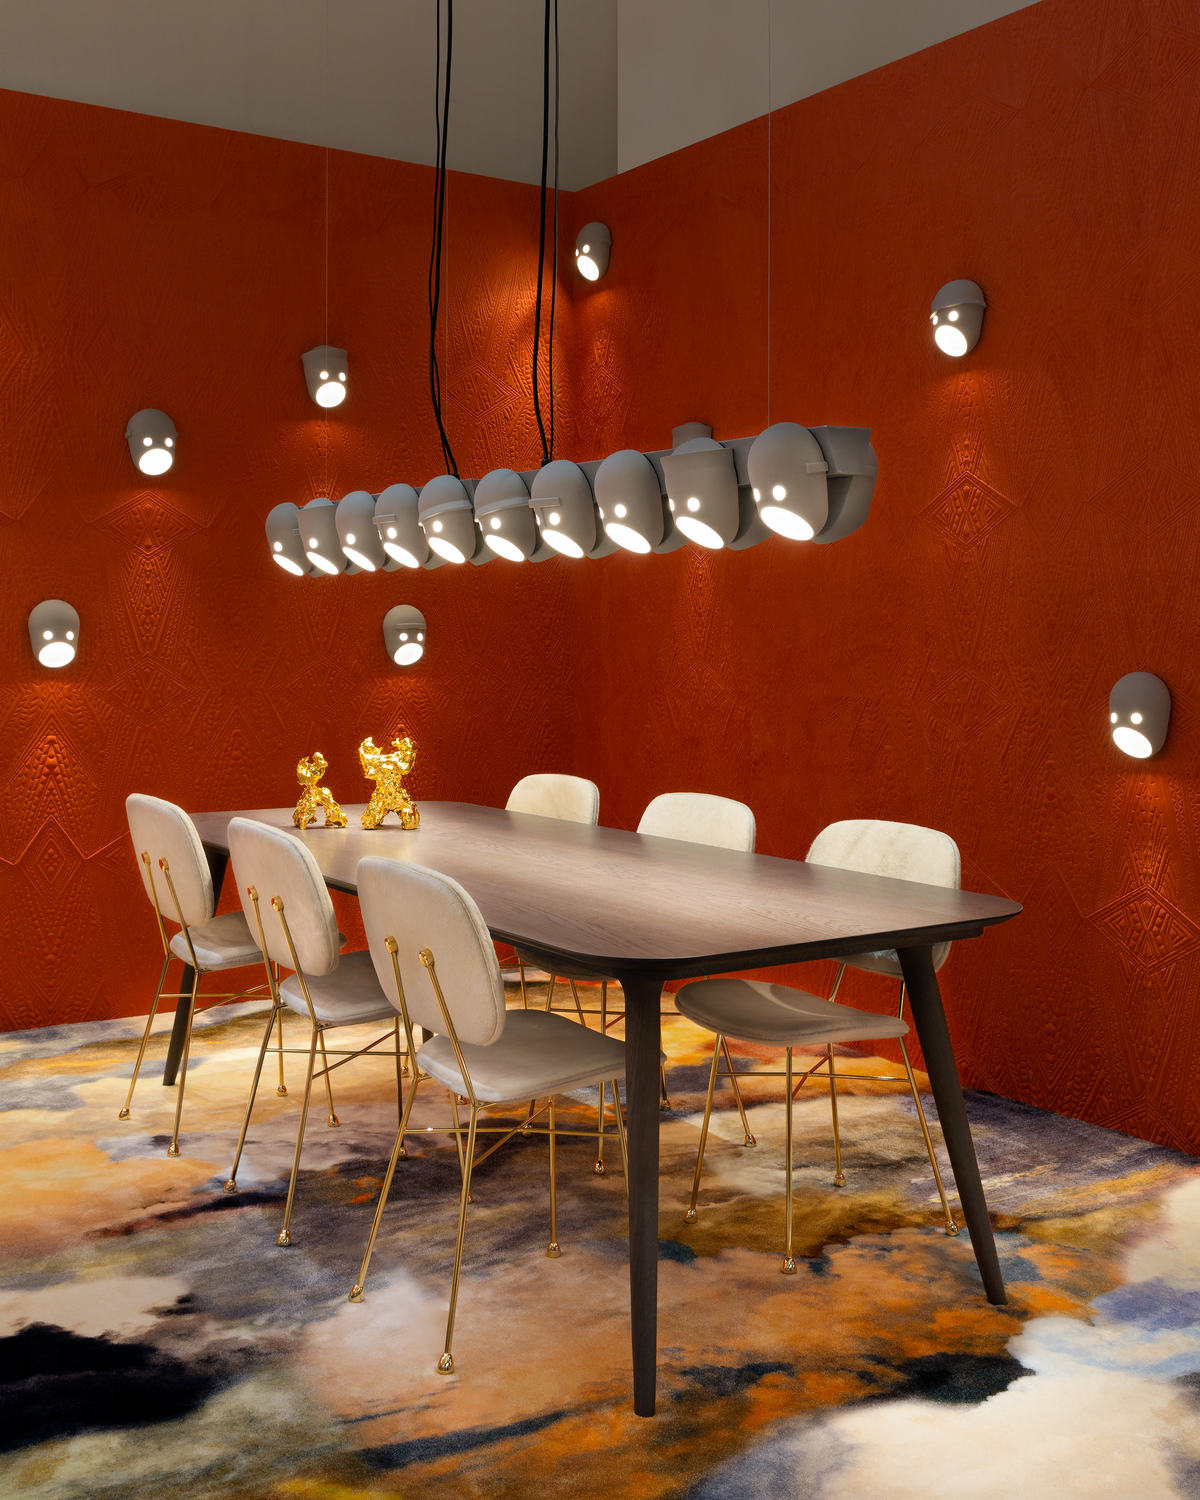 Interior Milan 2019 with The Party suspension light, The Party Wall Lamp and The Golden Chair